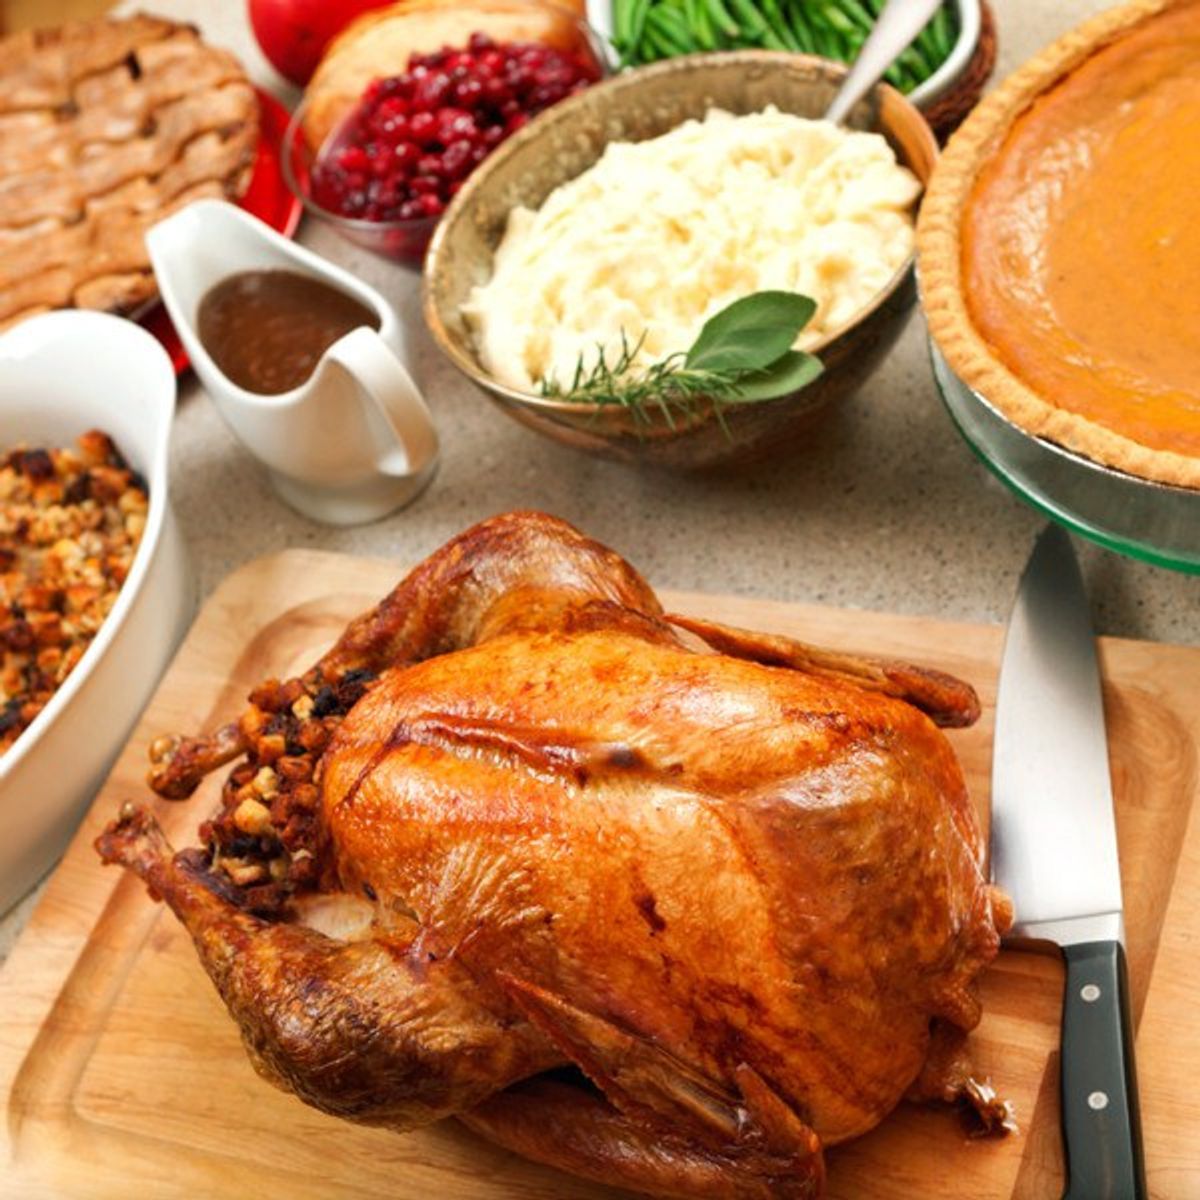 7 Reasons Why College Students Love Thanksgiving